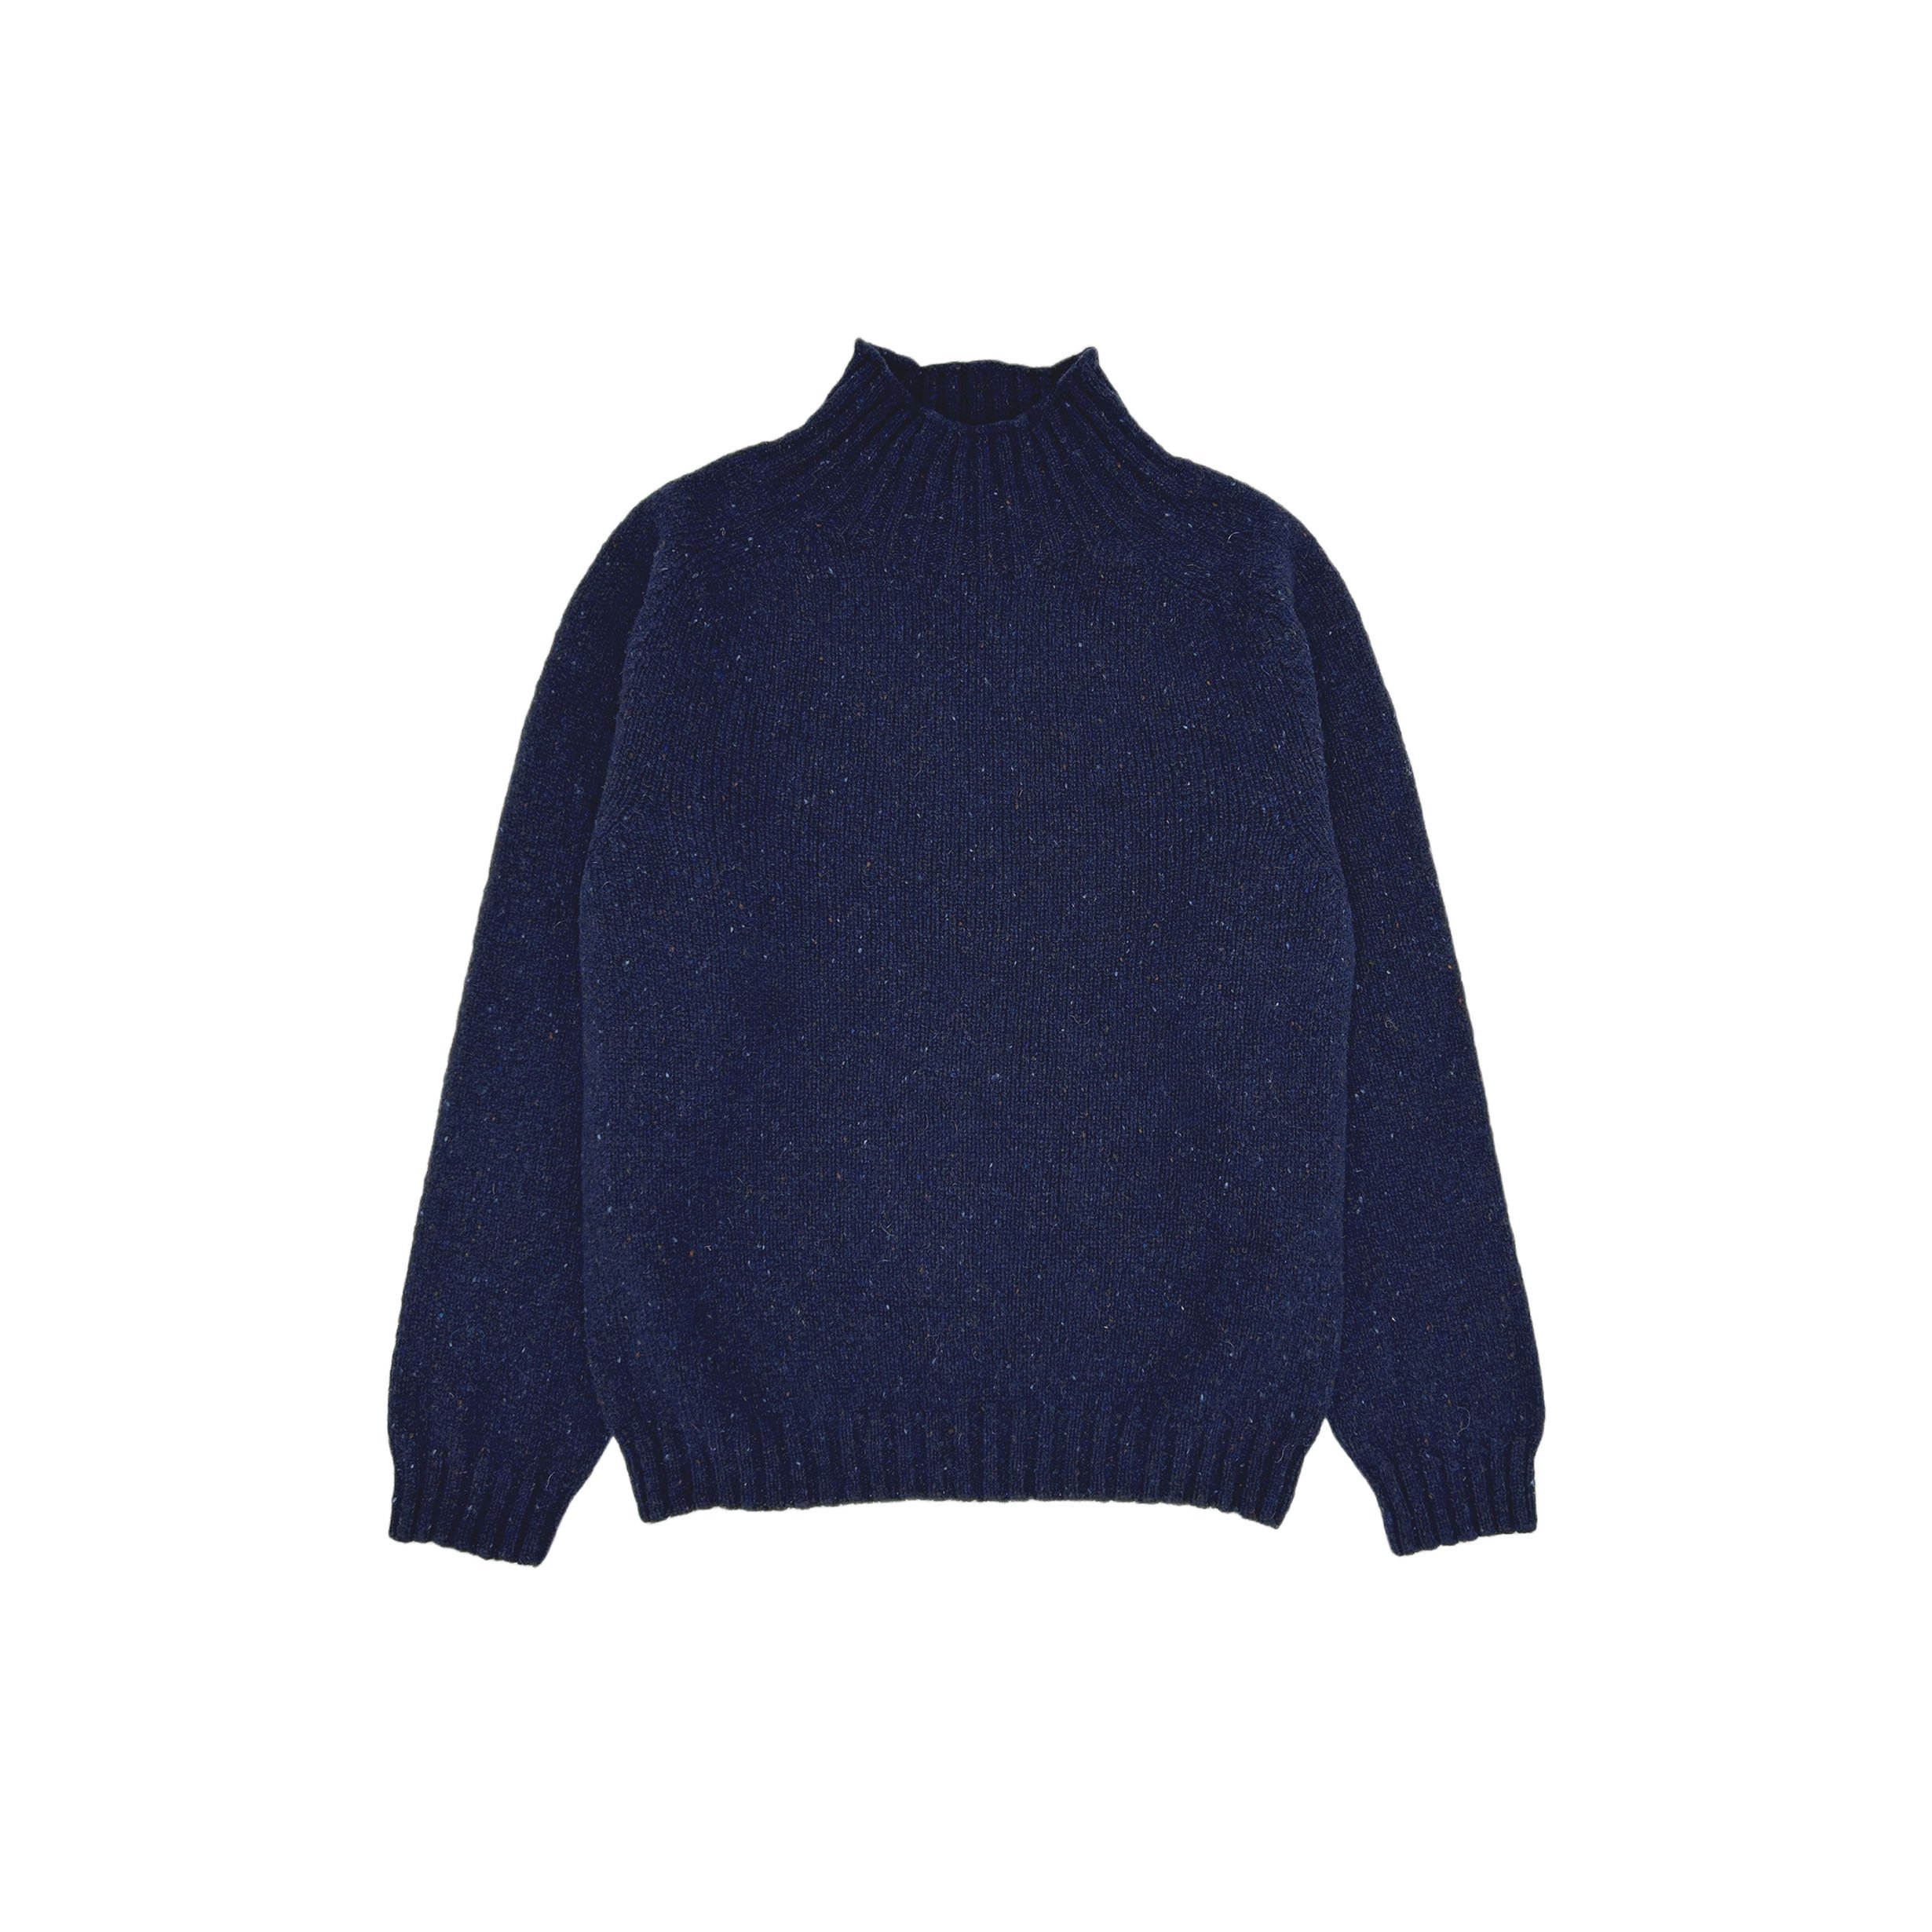 An image of Funnel Neck Glenugie Nep Womens Jumper - 4 Colours - Large/Jura Navy